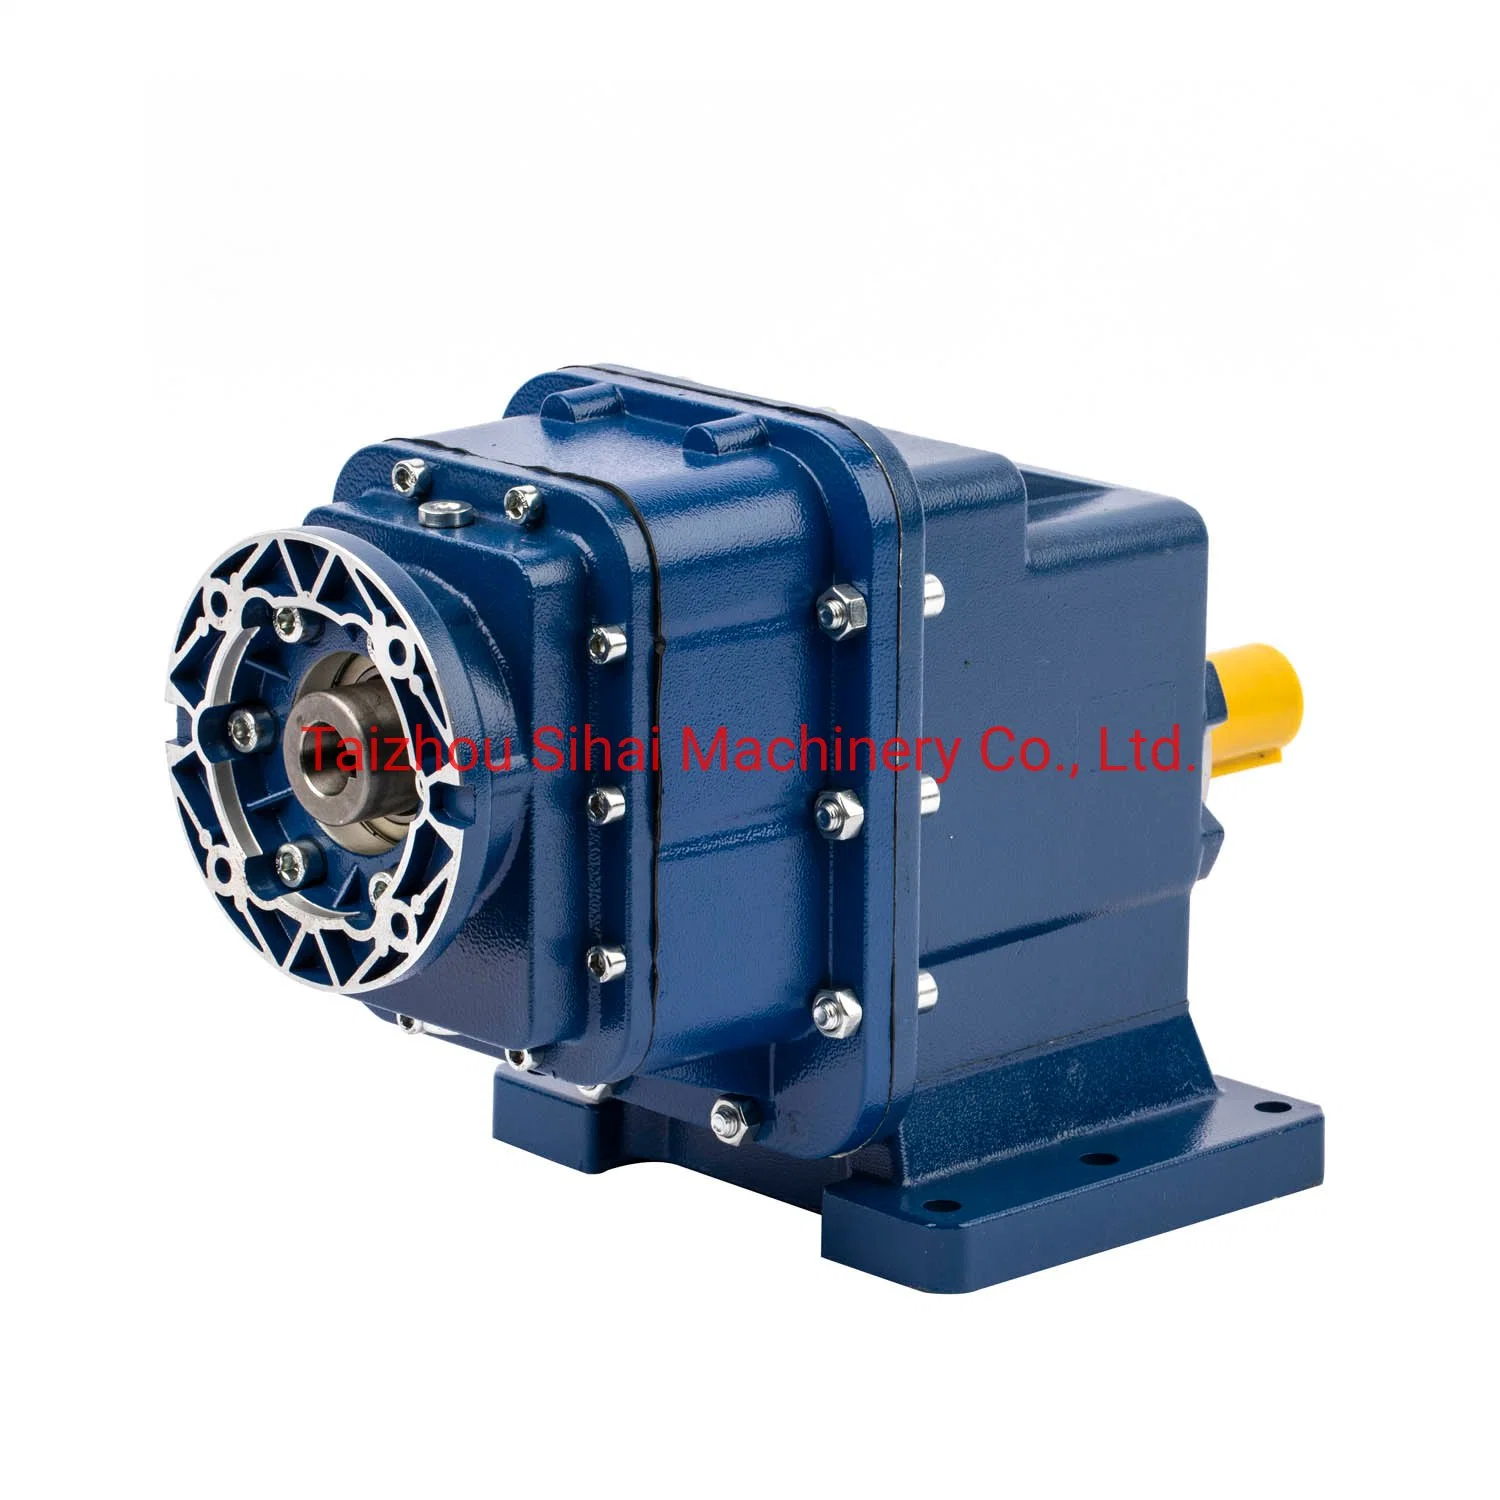 Trc Kpc Aluminum Coxial Inline Helical Gear Motor Speed Reducer Transmission Gearbox